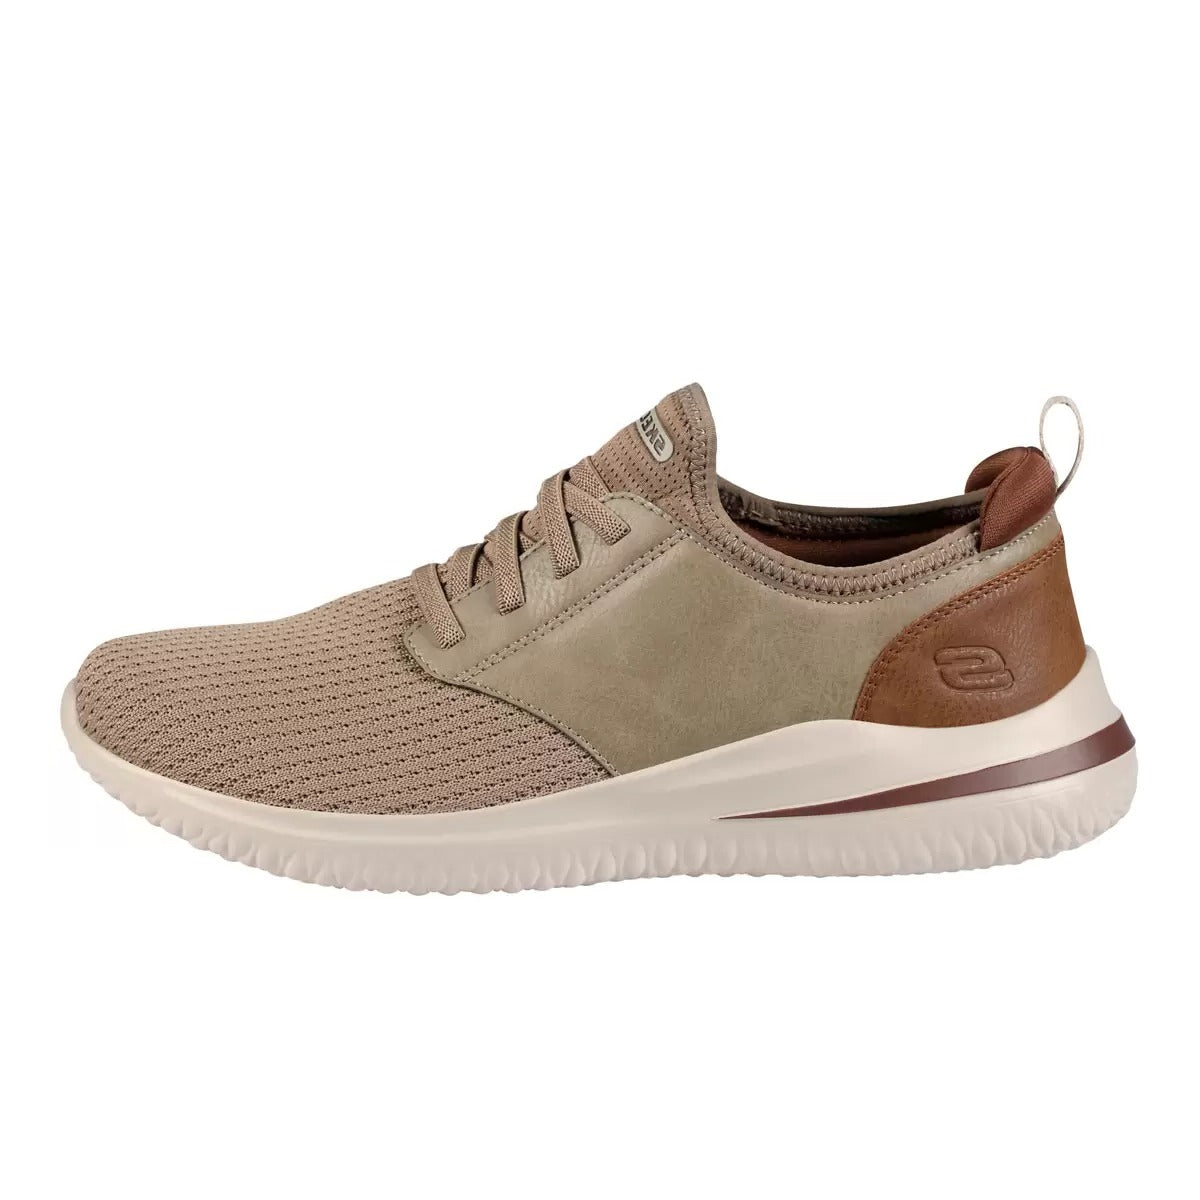 Skechers Men's Delson Taupe 1662281